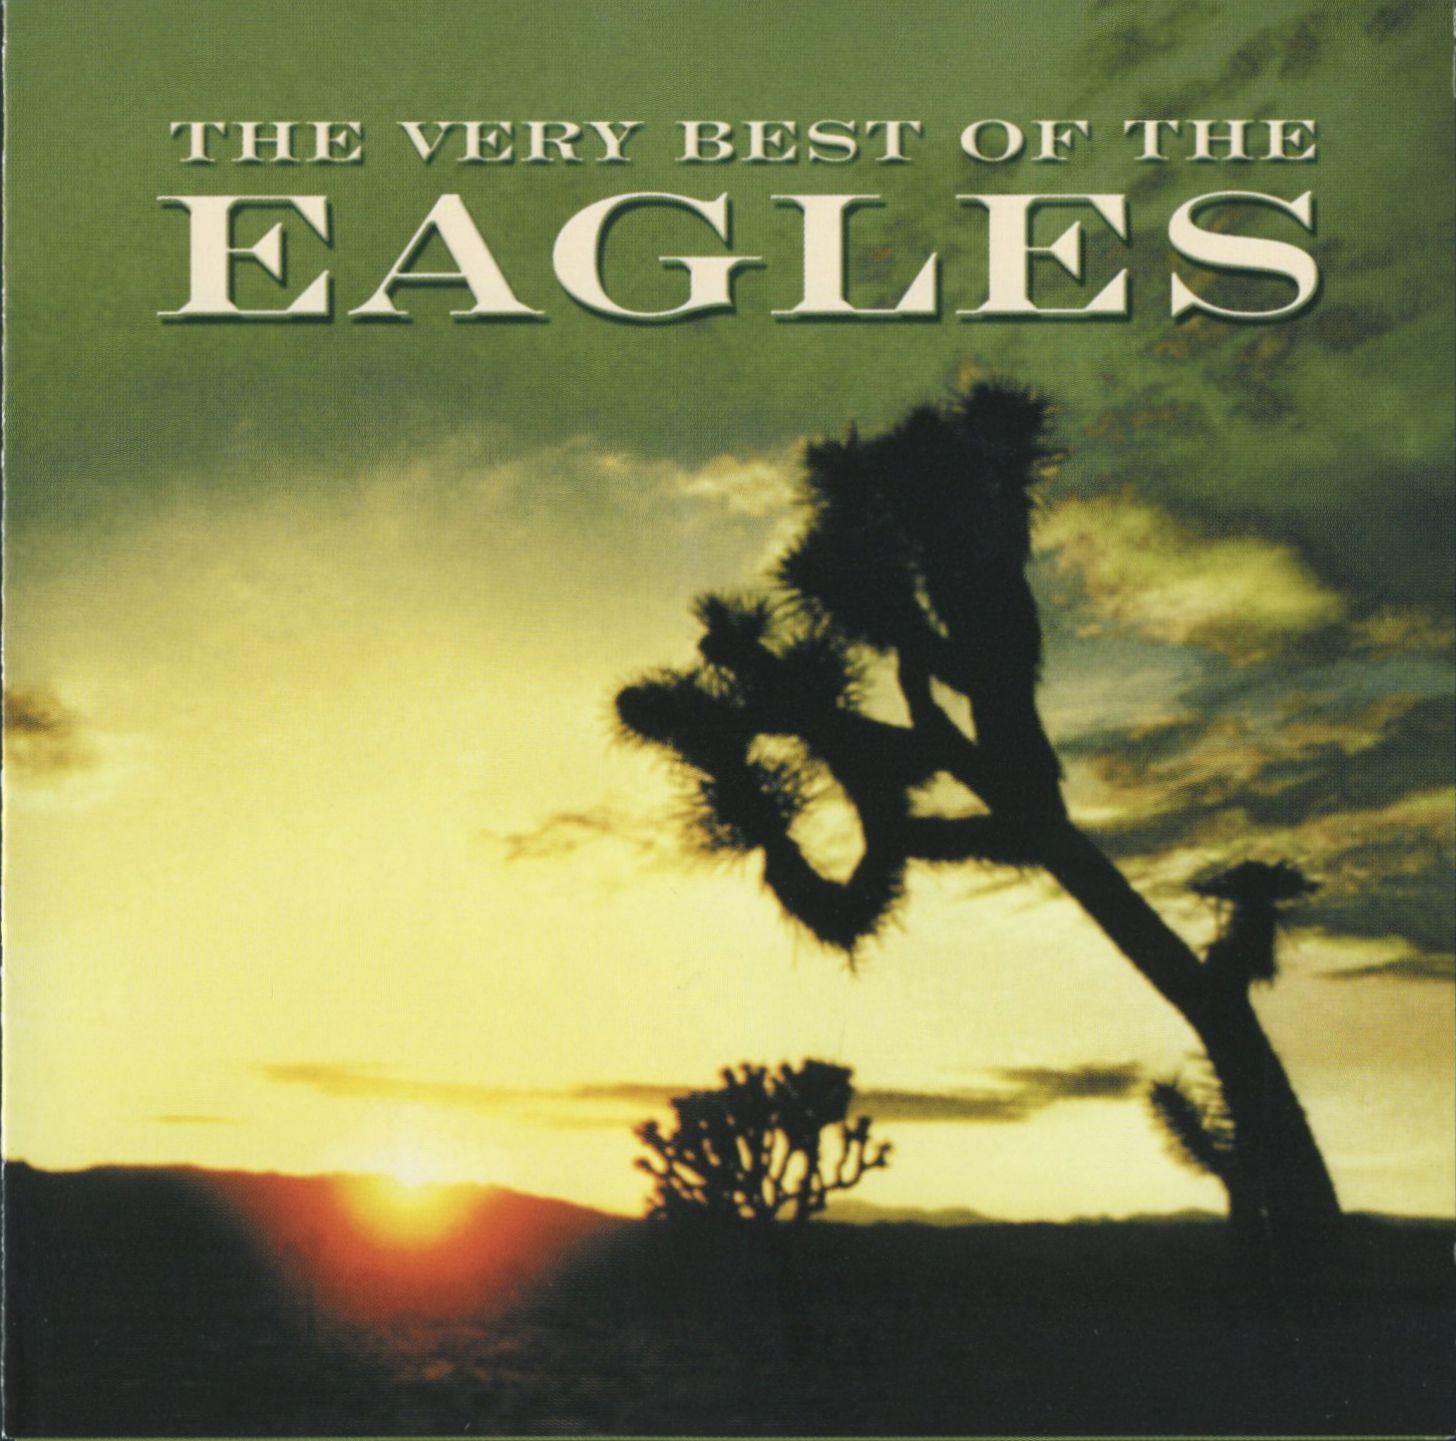 The Eagles - Greatest Hits | FULL LP DOWNLOAD1456 x 1441